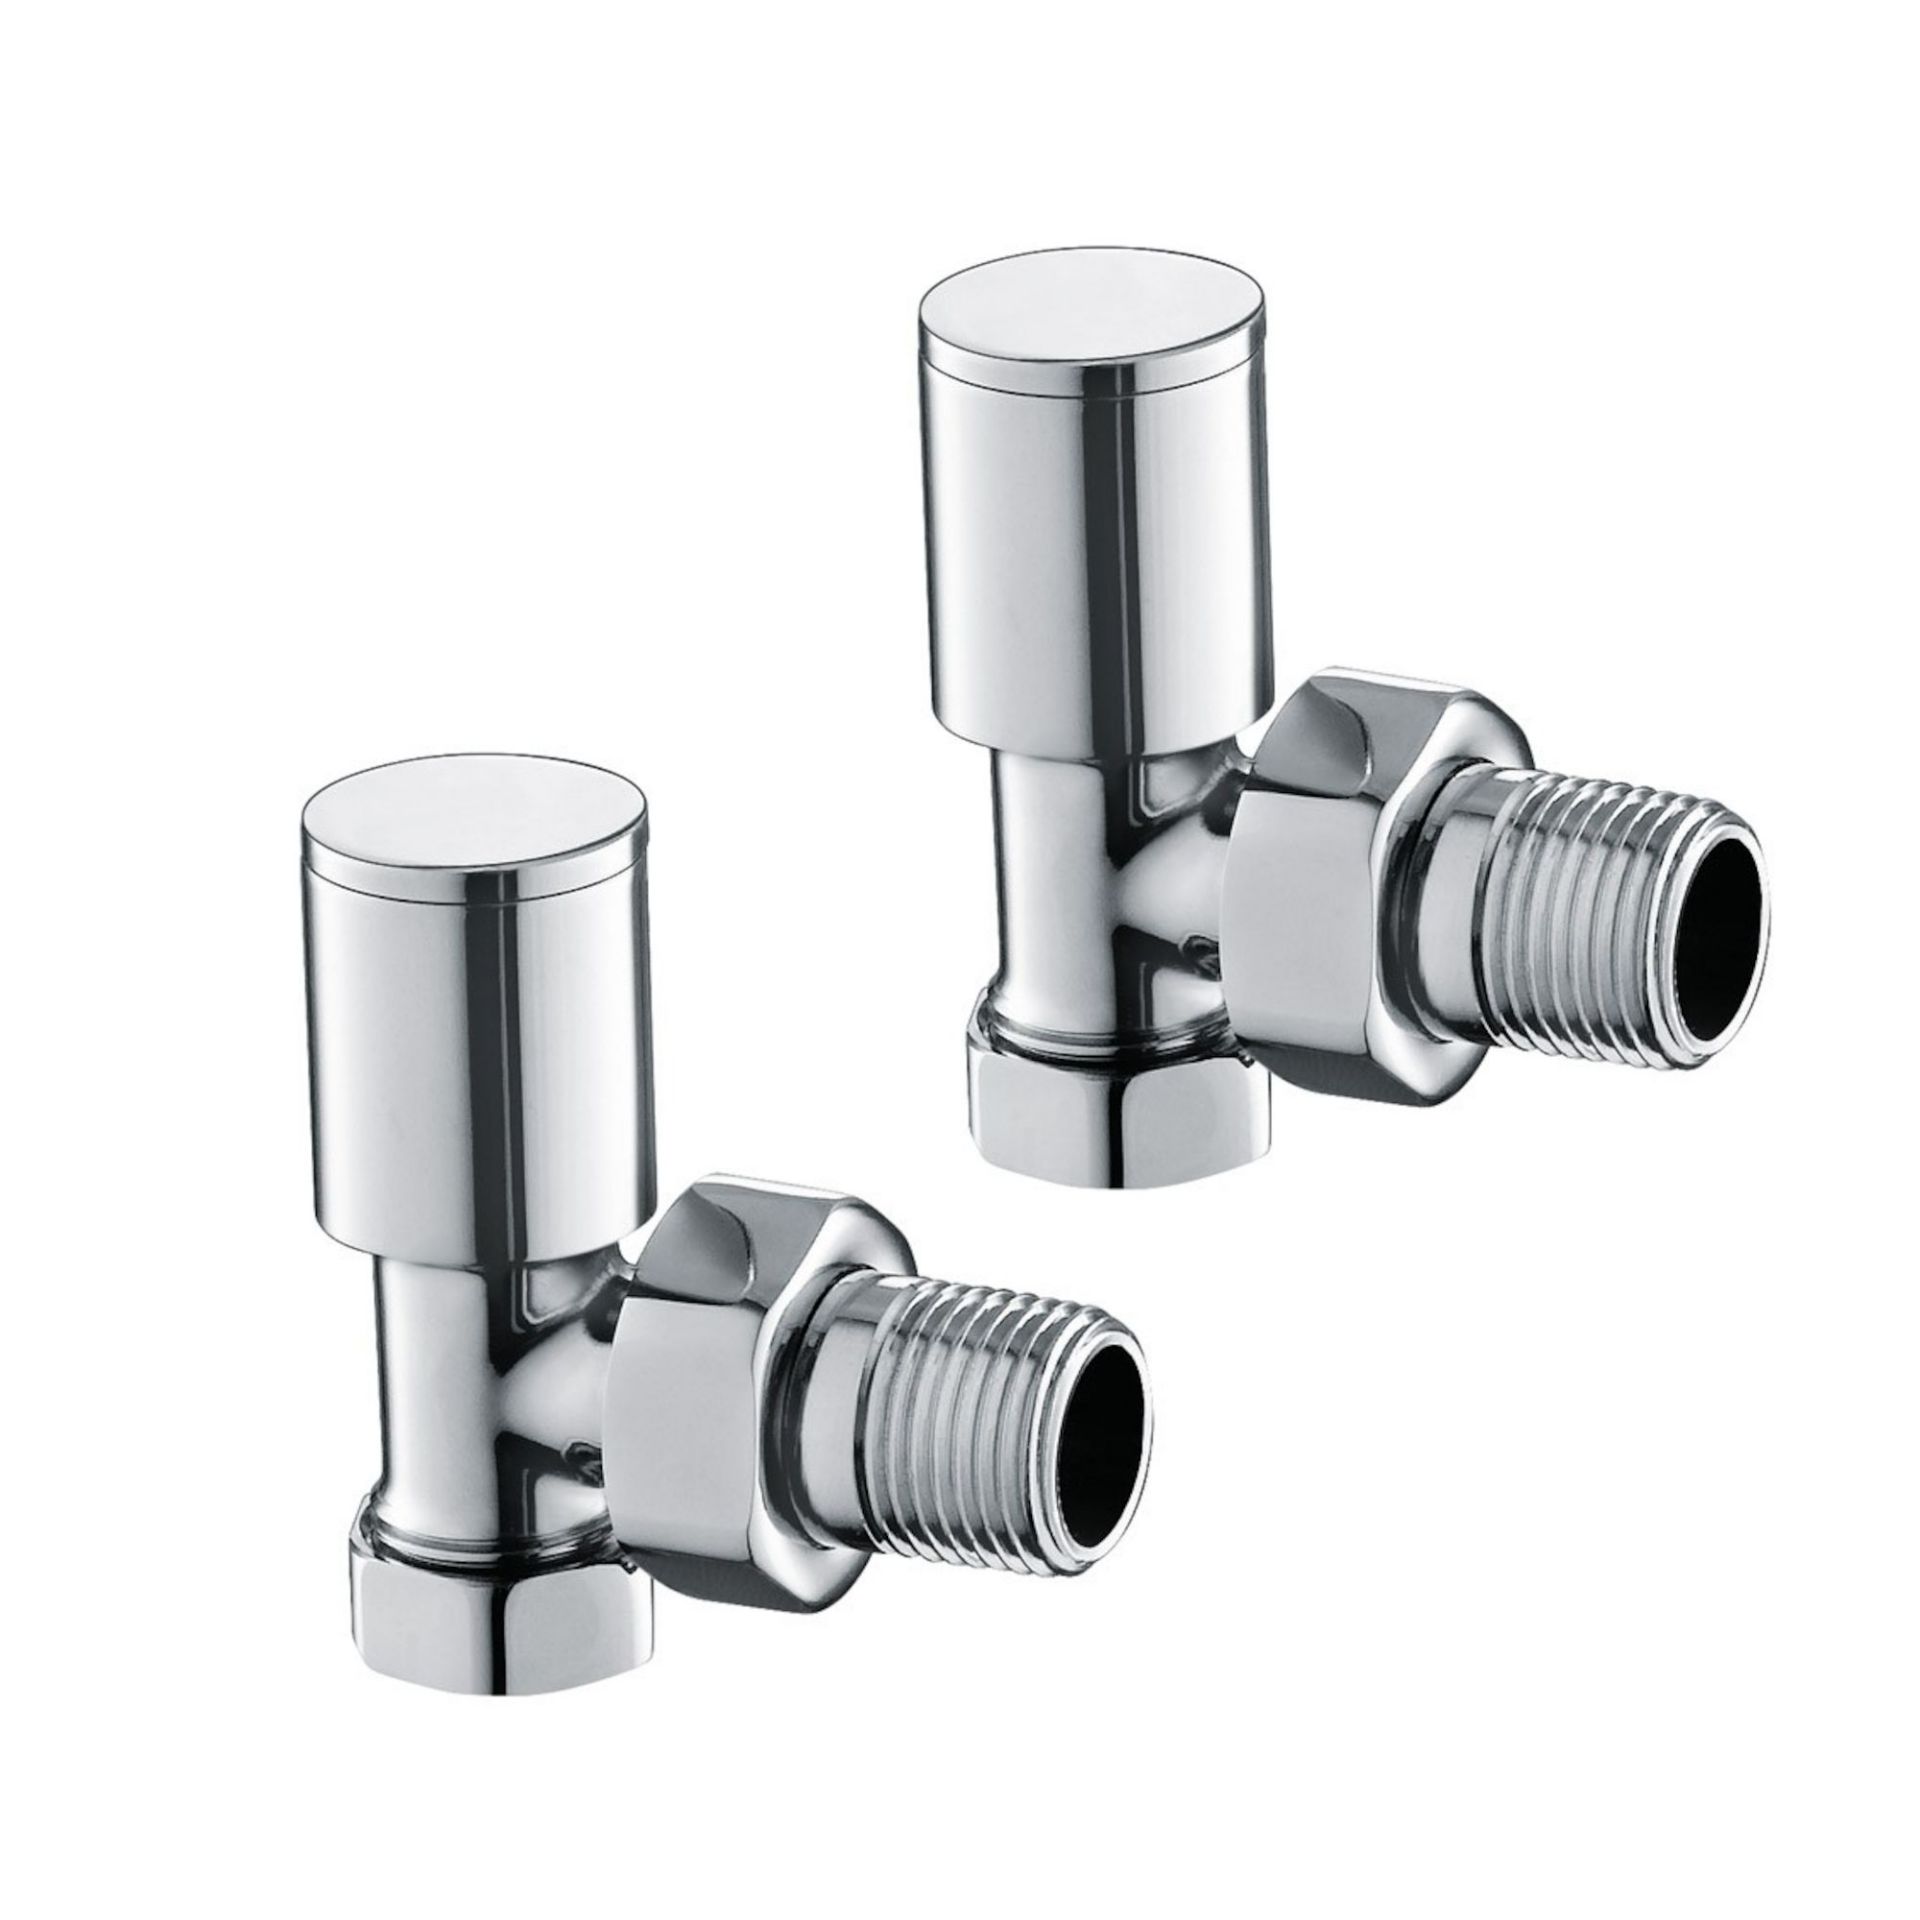 15mm Standard Connection Angled Radiator Valves - Heavy Duty Polished Chrome Plated Brass Poli... - Image 2 of 3